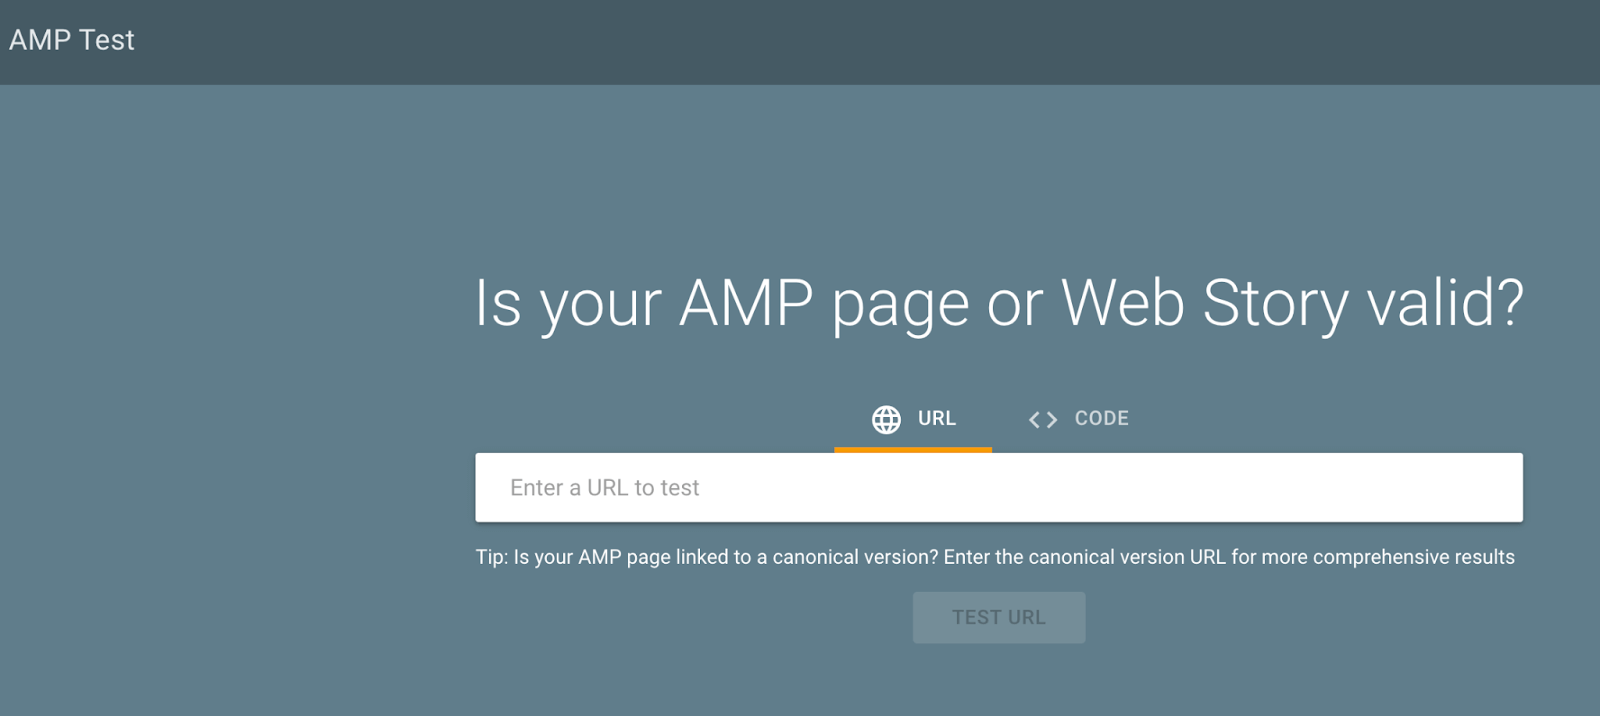 AMP Test Tool to ensure that your page meets the Google Search requirements for a valid AMP HTML document.